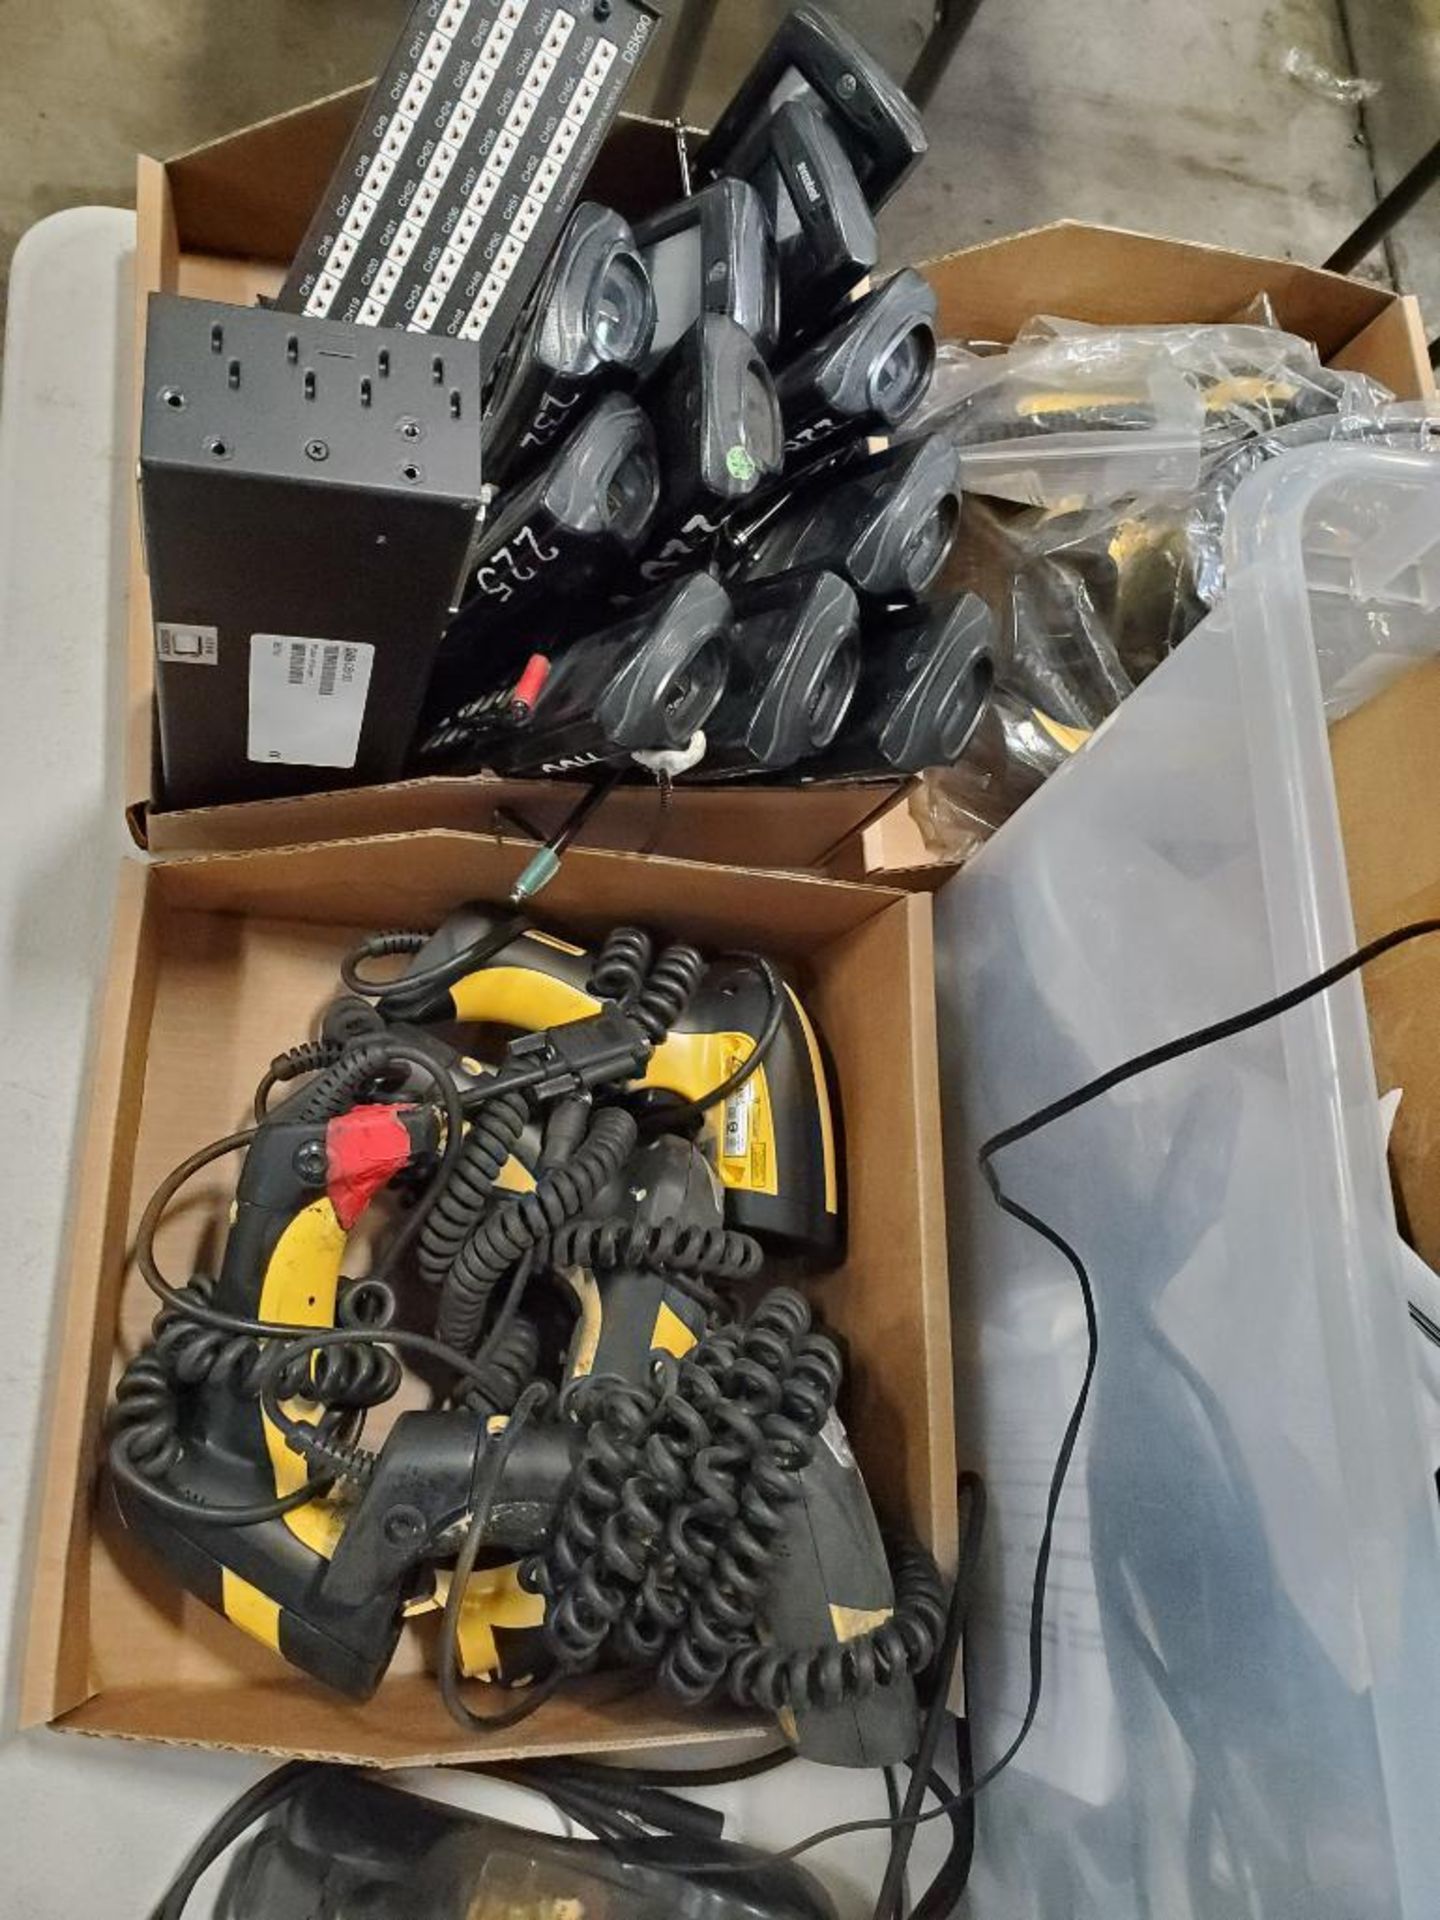 Assorted electrical power supply, cords, chargers, hand tool cutter, hand held scanners. - Image 11 of 17